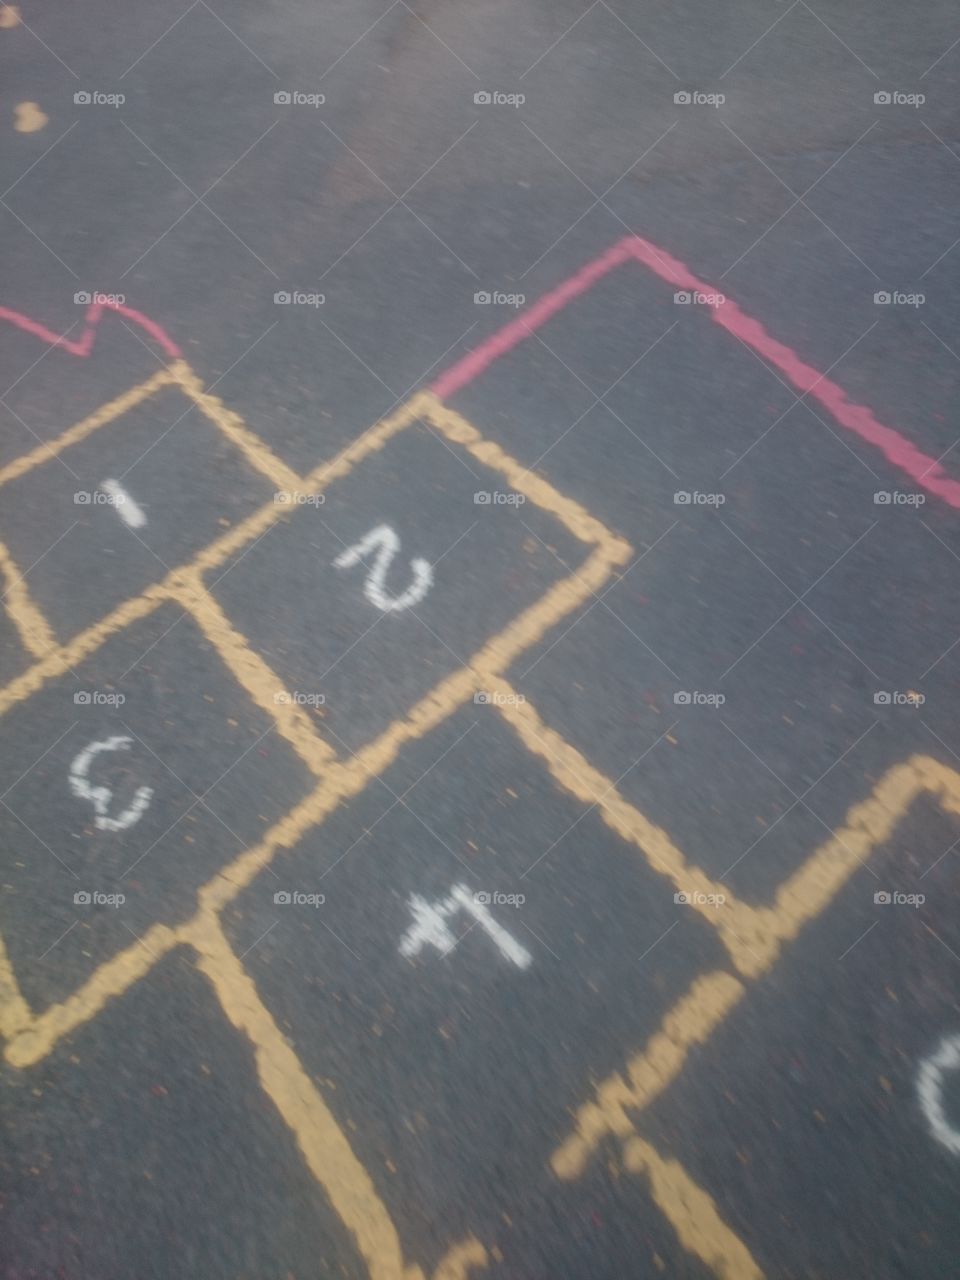 Little bit hopscotch in the school playground at howdenburn in Jedburgh on April 21st 2019